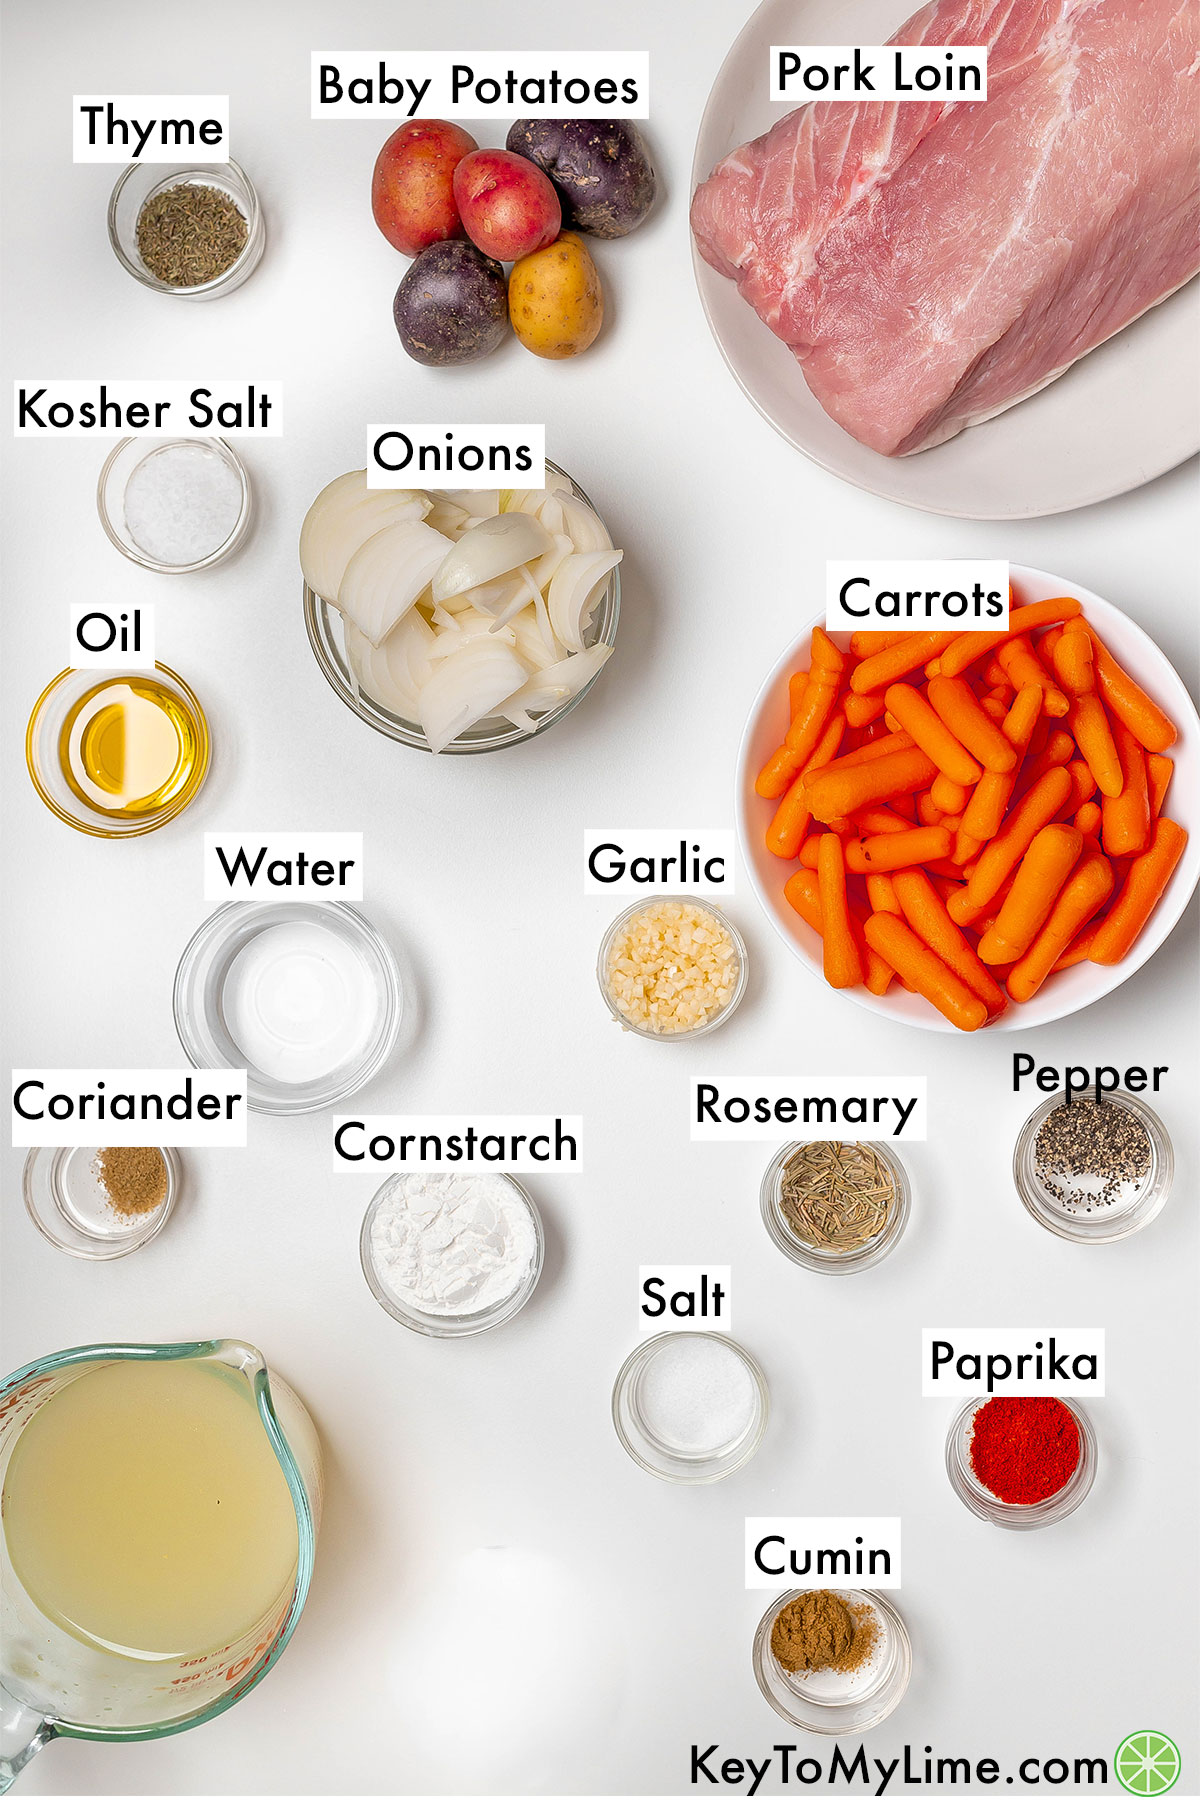 The labeled ingredients for Instant Pot pork loin.